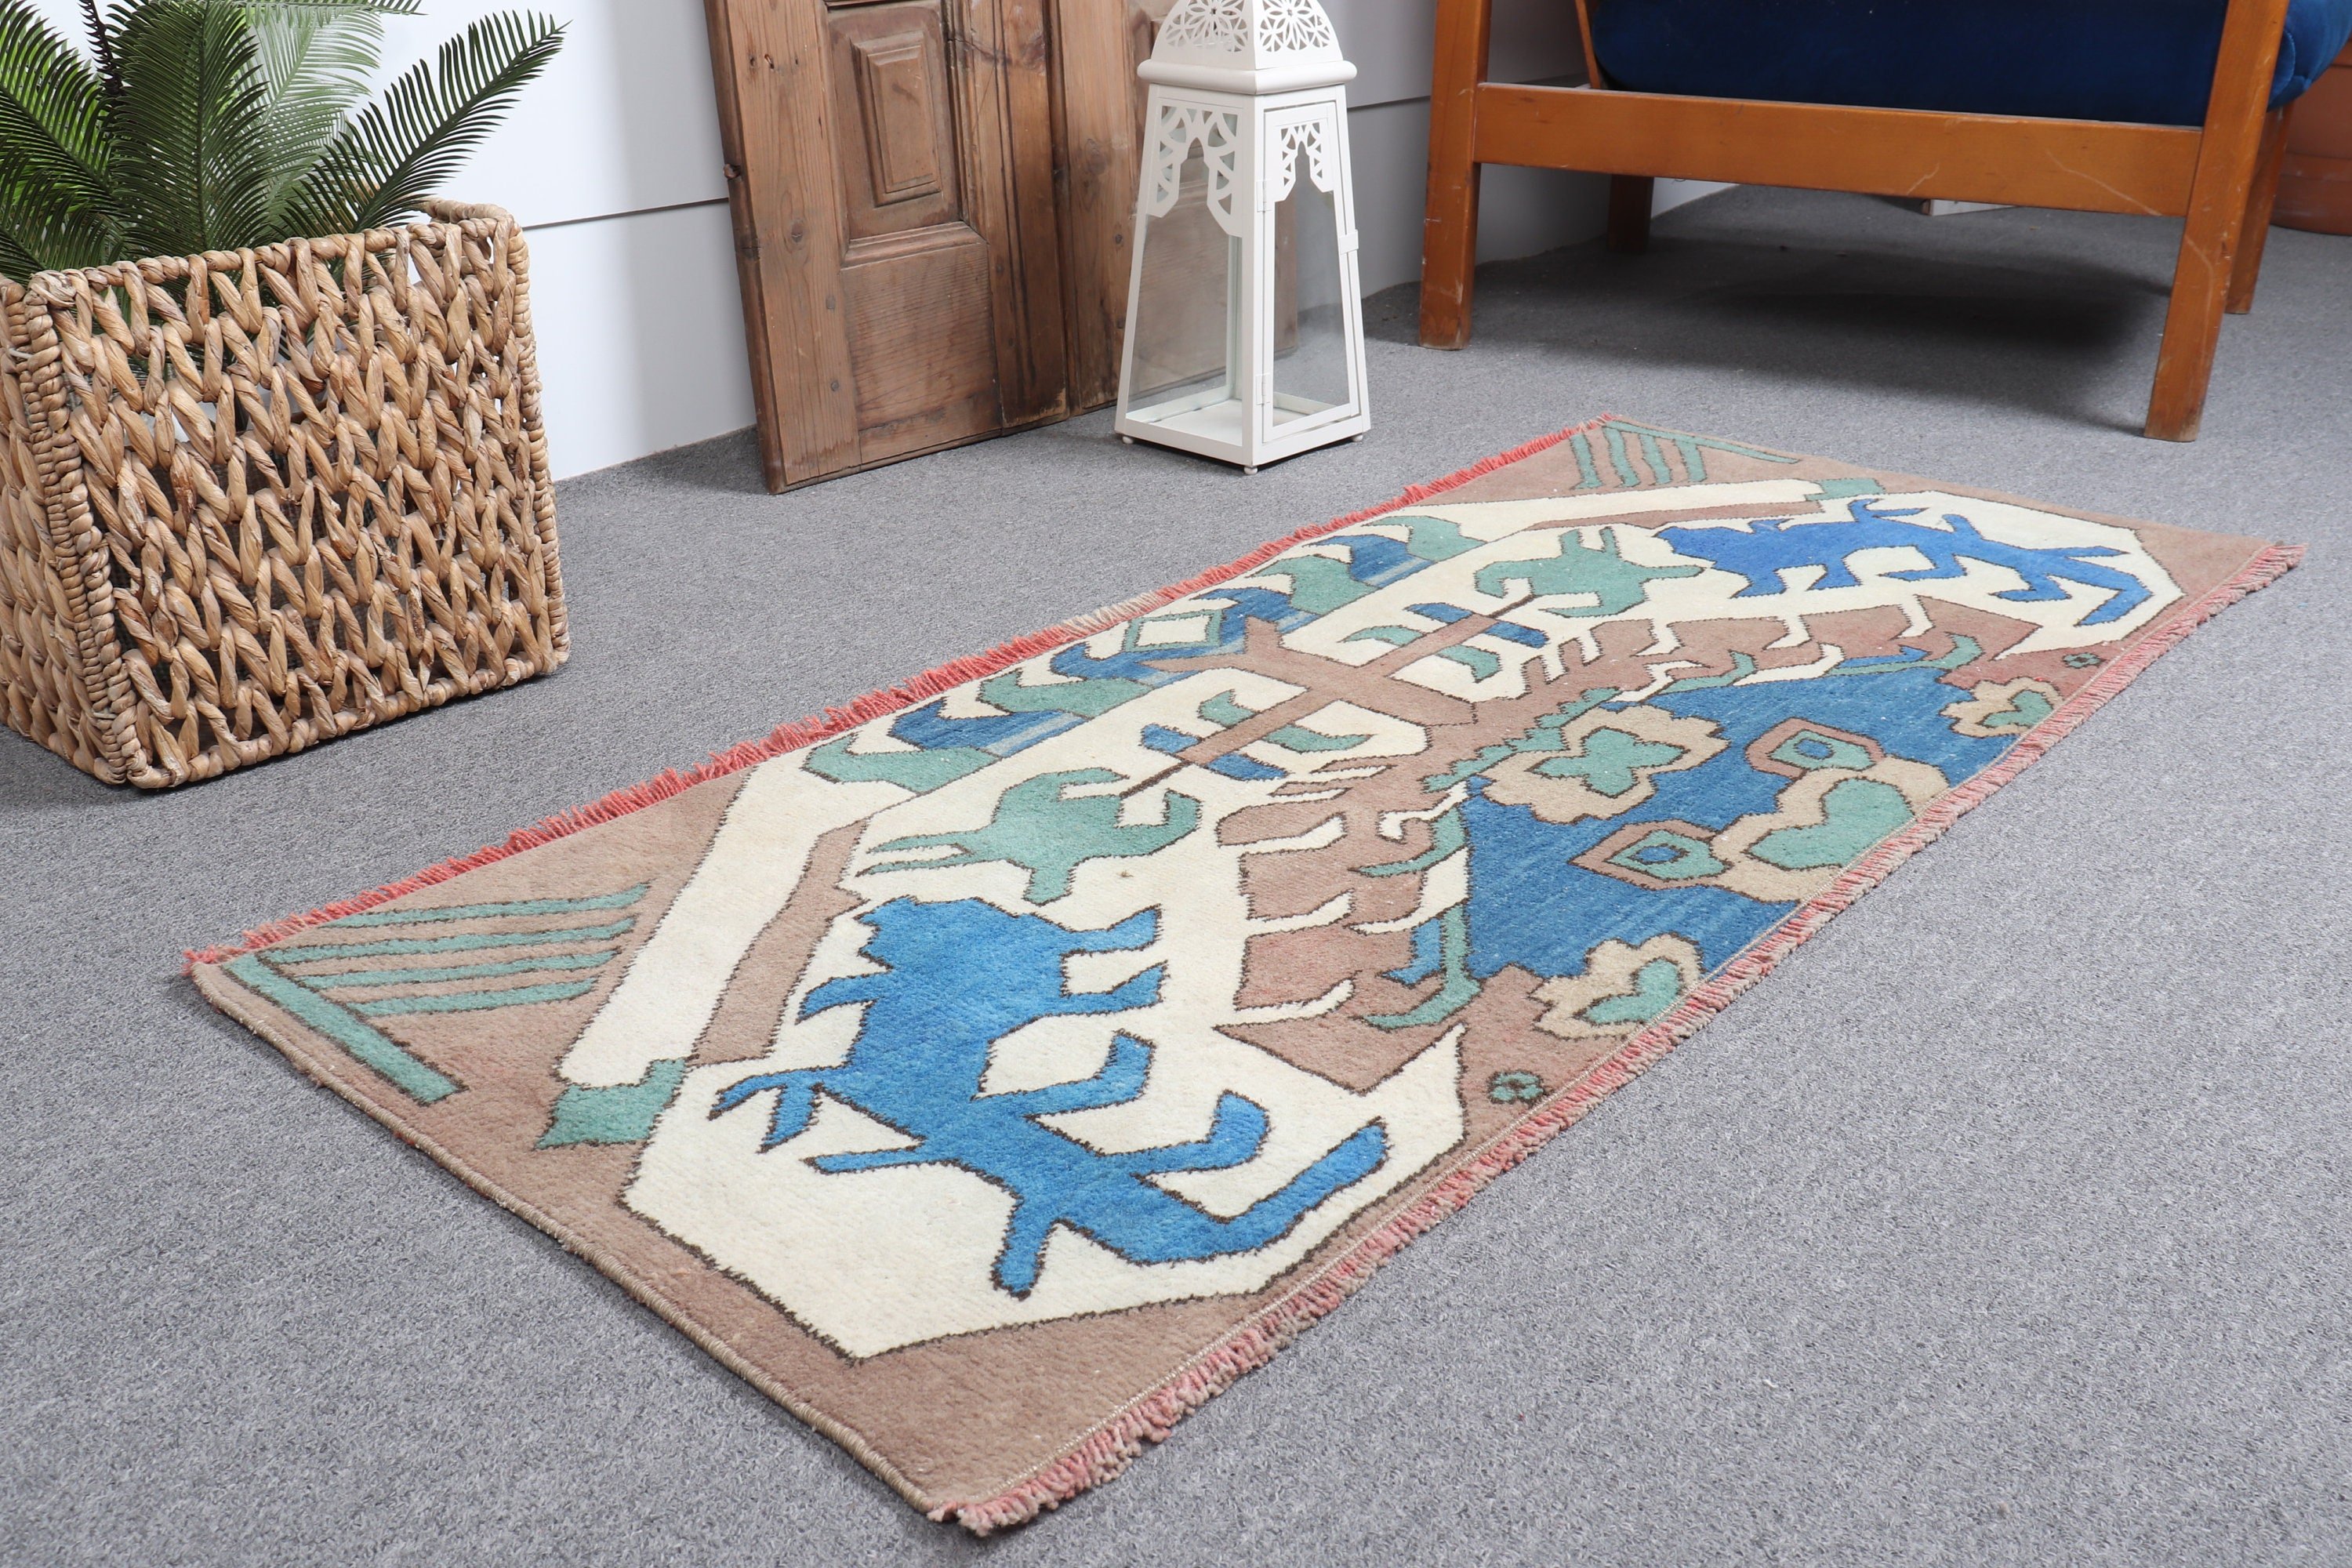 Rugs for Wall Hanging, Door Mat Rug, 1.9x4.6 ft Small Rug, Oushak Rugs, Turkish Rug, Old Rug, Kitchen Rugs, Blue Antique Rugs, Vintage Rug